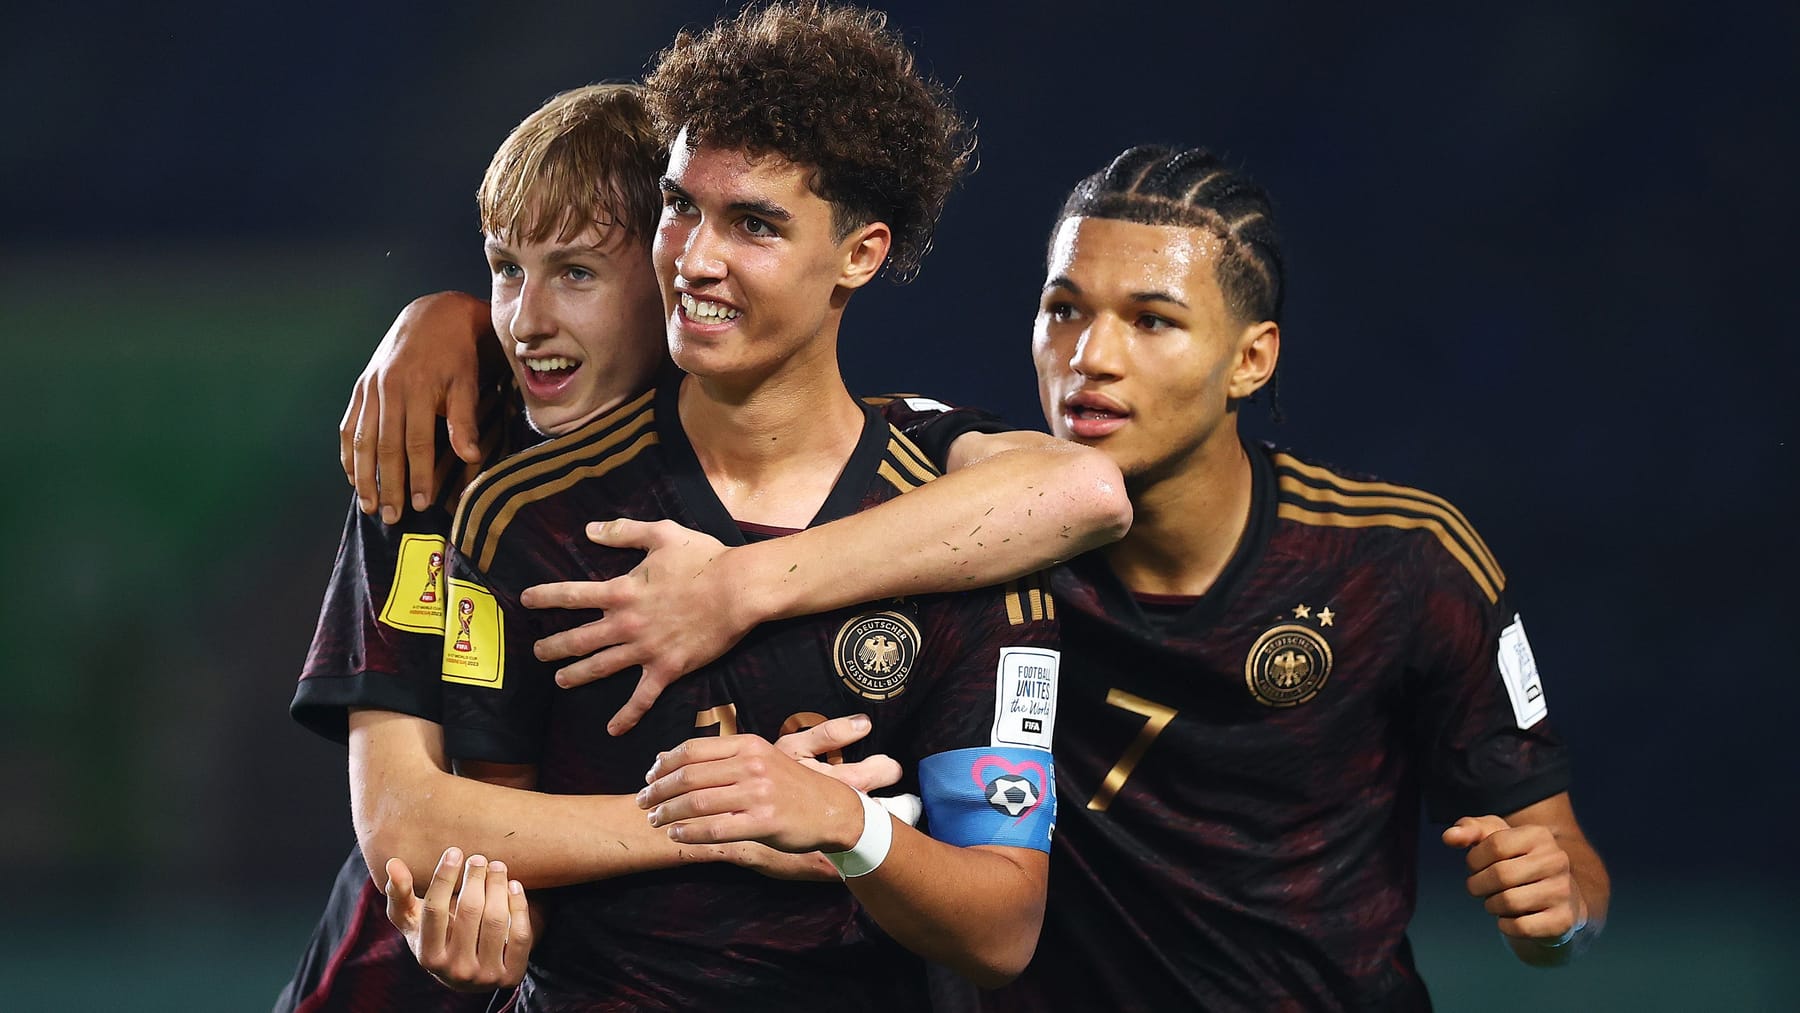 Germany dominates – early in the Round of 16